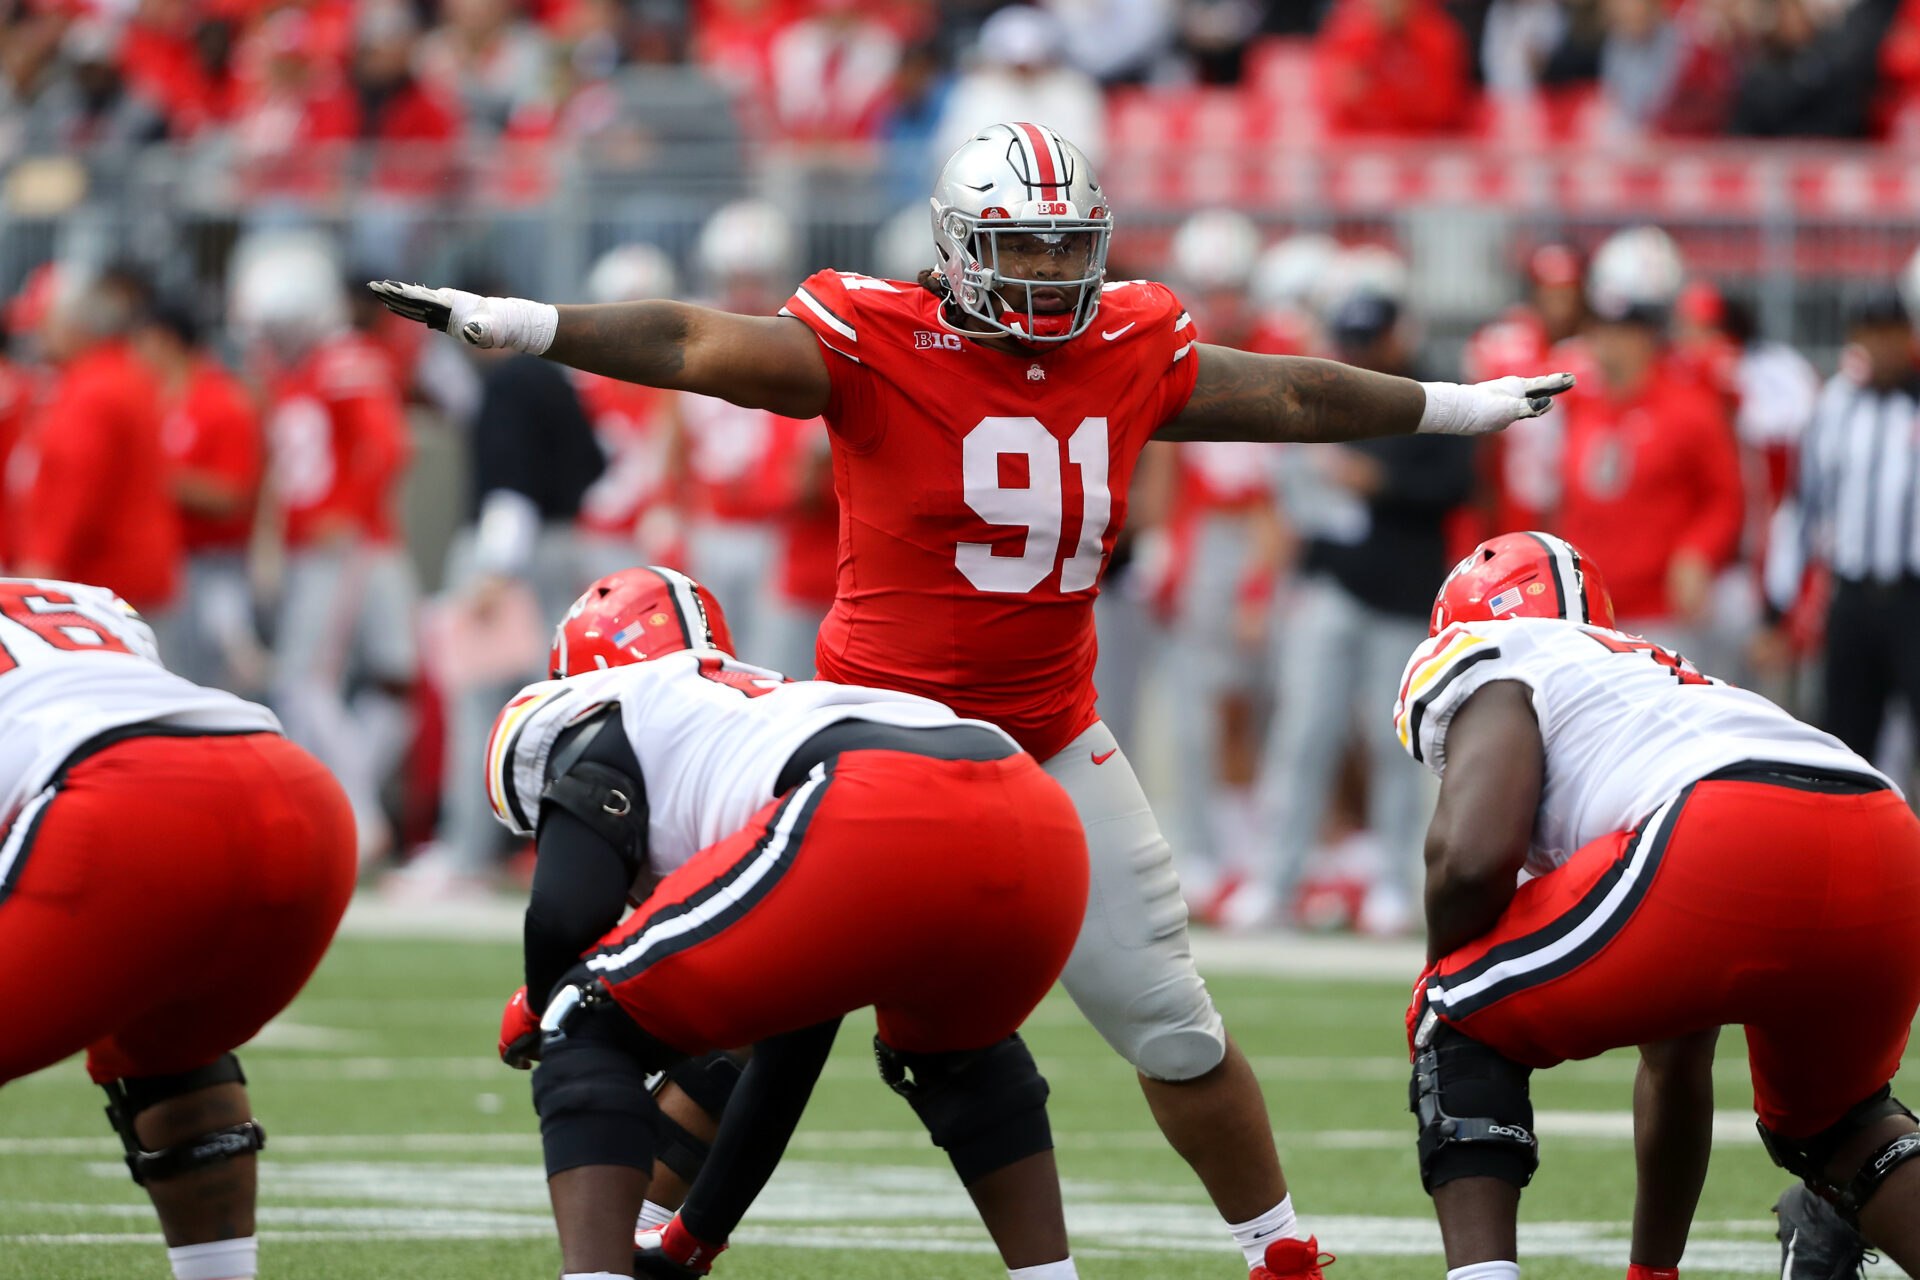 Ohio State Buckeyes defensive tackle Tyleik Williams (91) makes a call during the third quarter against the Maryland Terrapins at Ohio Stadium.